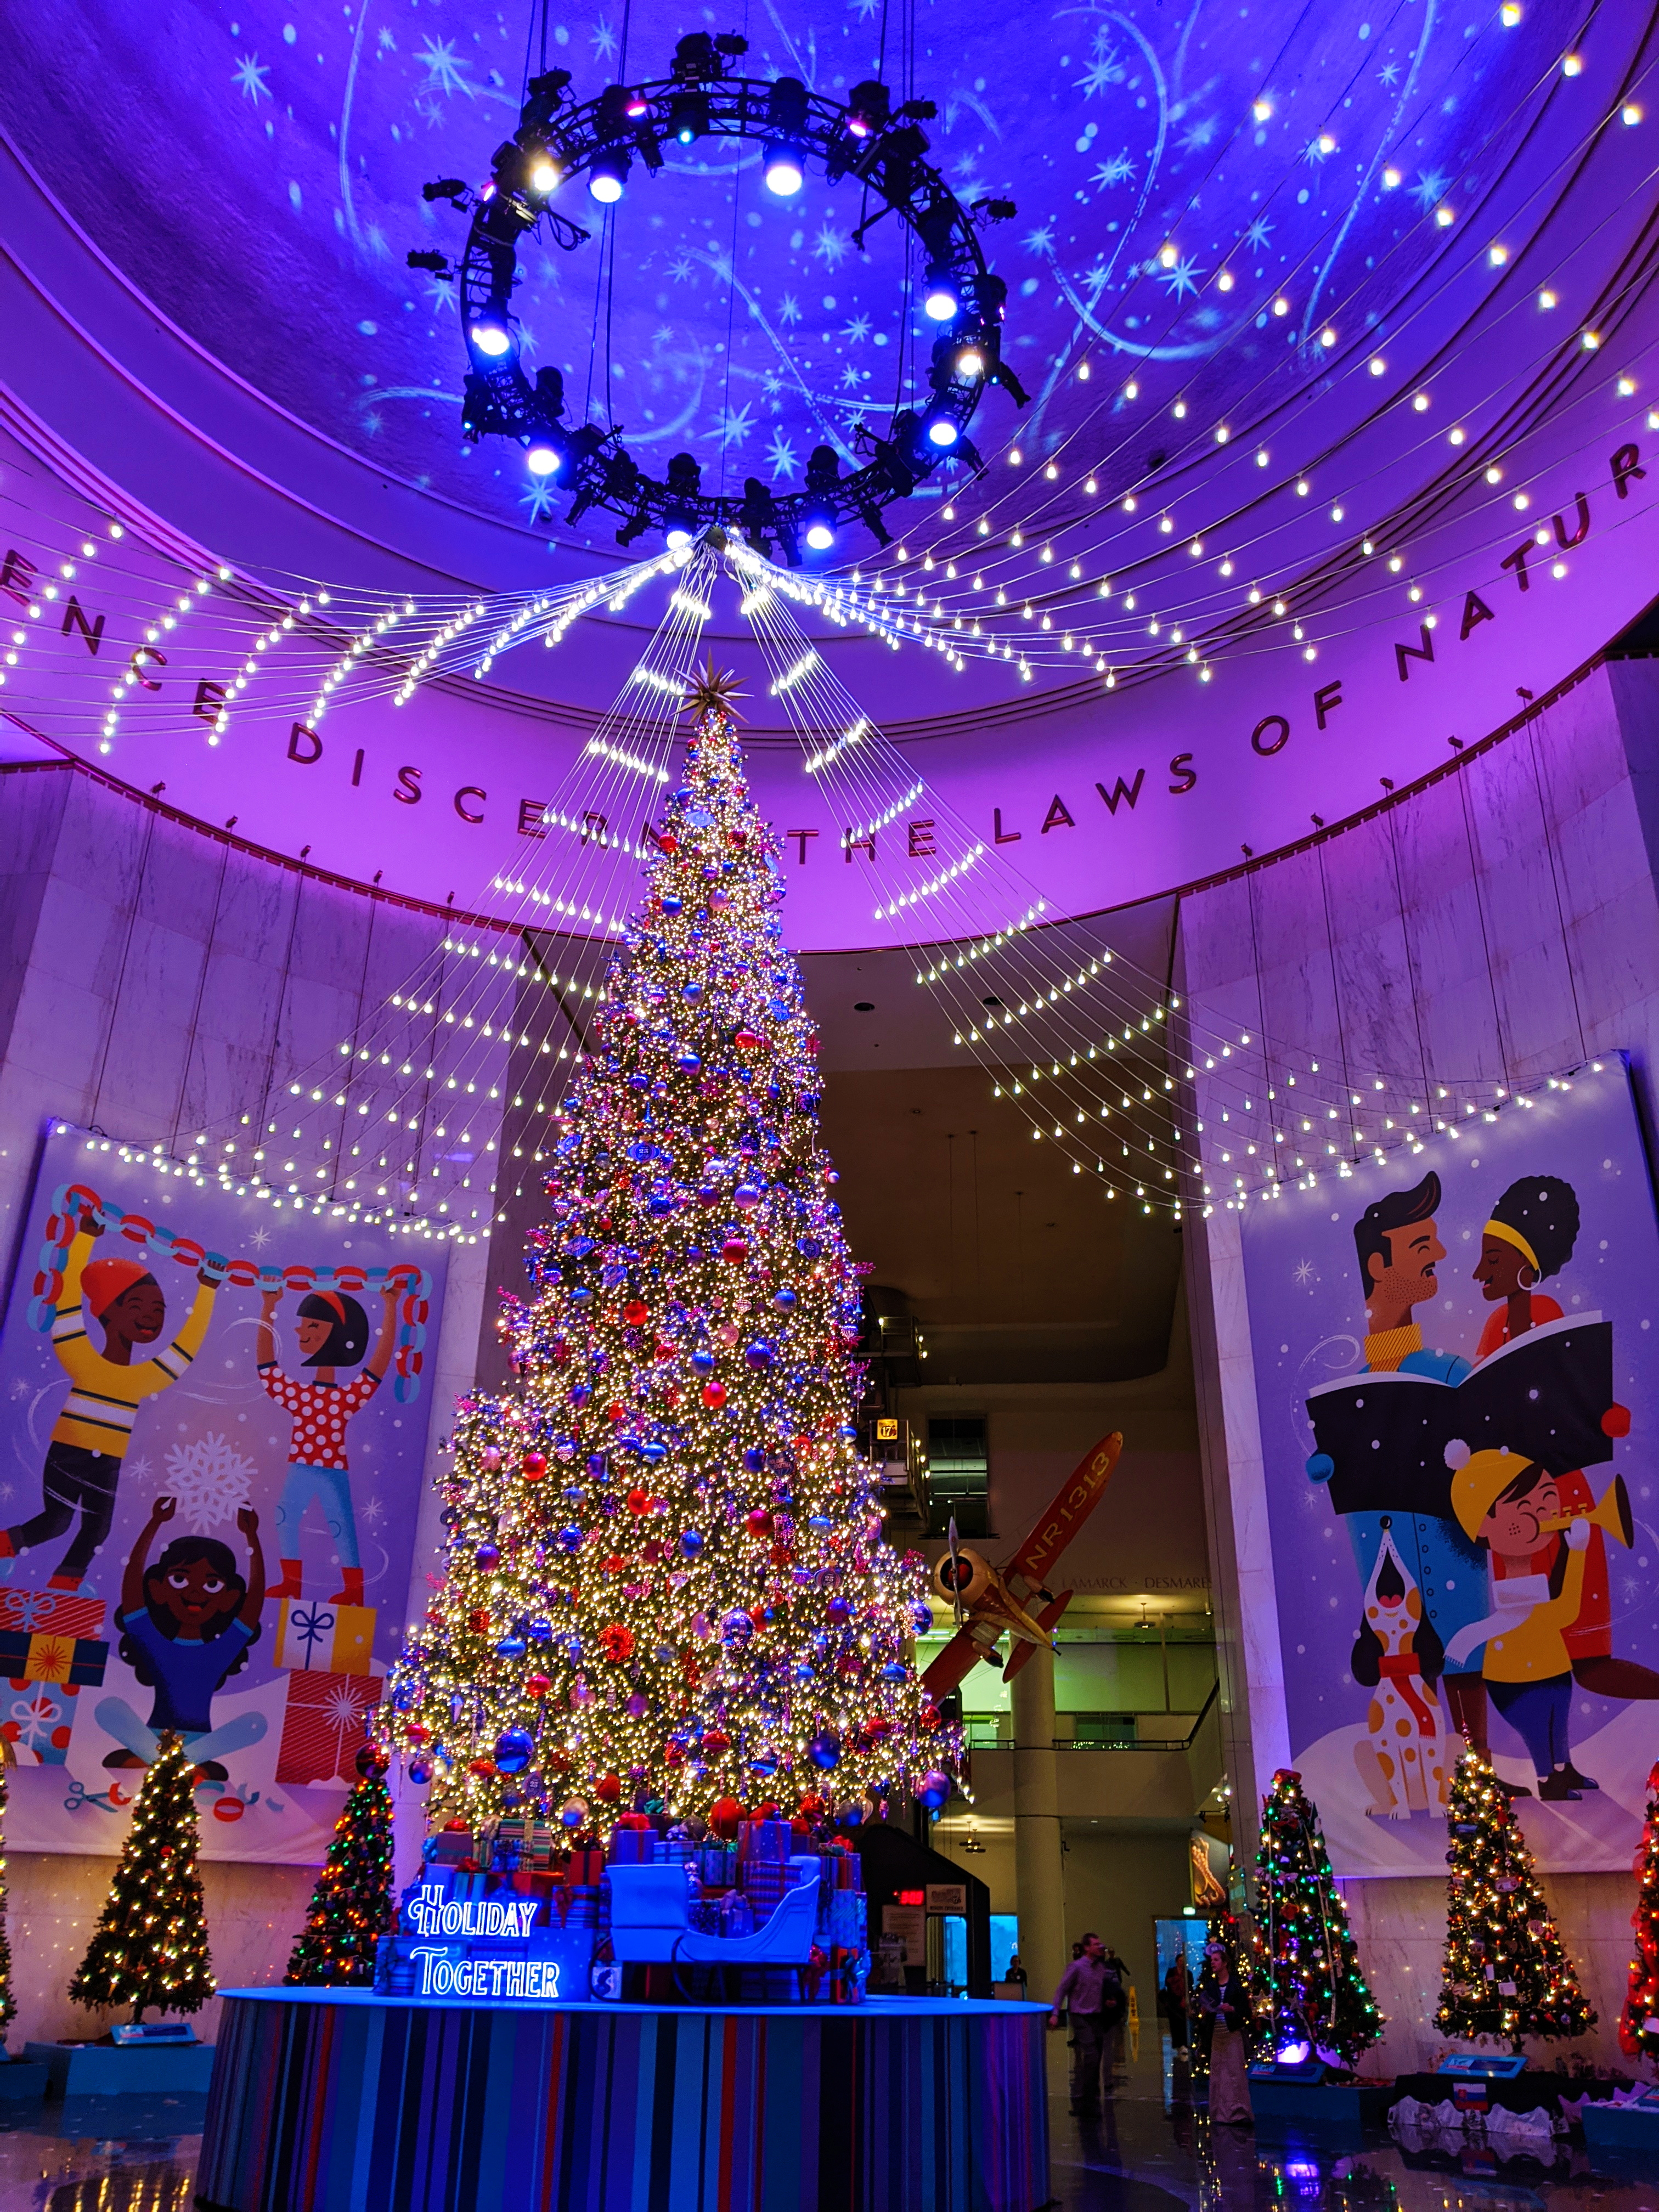 Museum of Science and Industry Christmas Around the World - Chicago Holiday Events - Chicago's Museum of Science and Industry is fun year-round, but their Christmas Around the World exhibit makes the holidays even more magical! Here's what to expect at MSI Christmas Around the World in Chicago. #chicago #choosechicago #chicagotravel